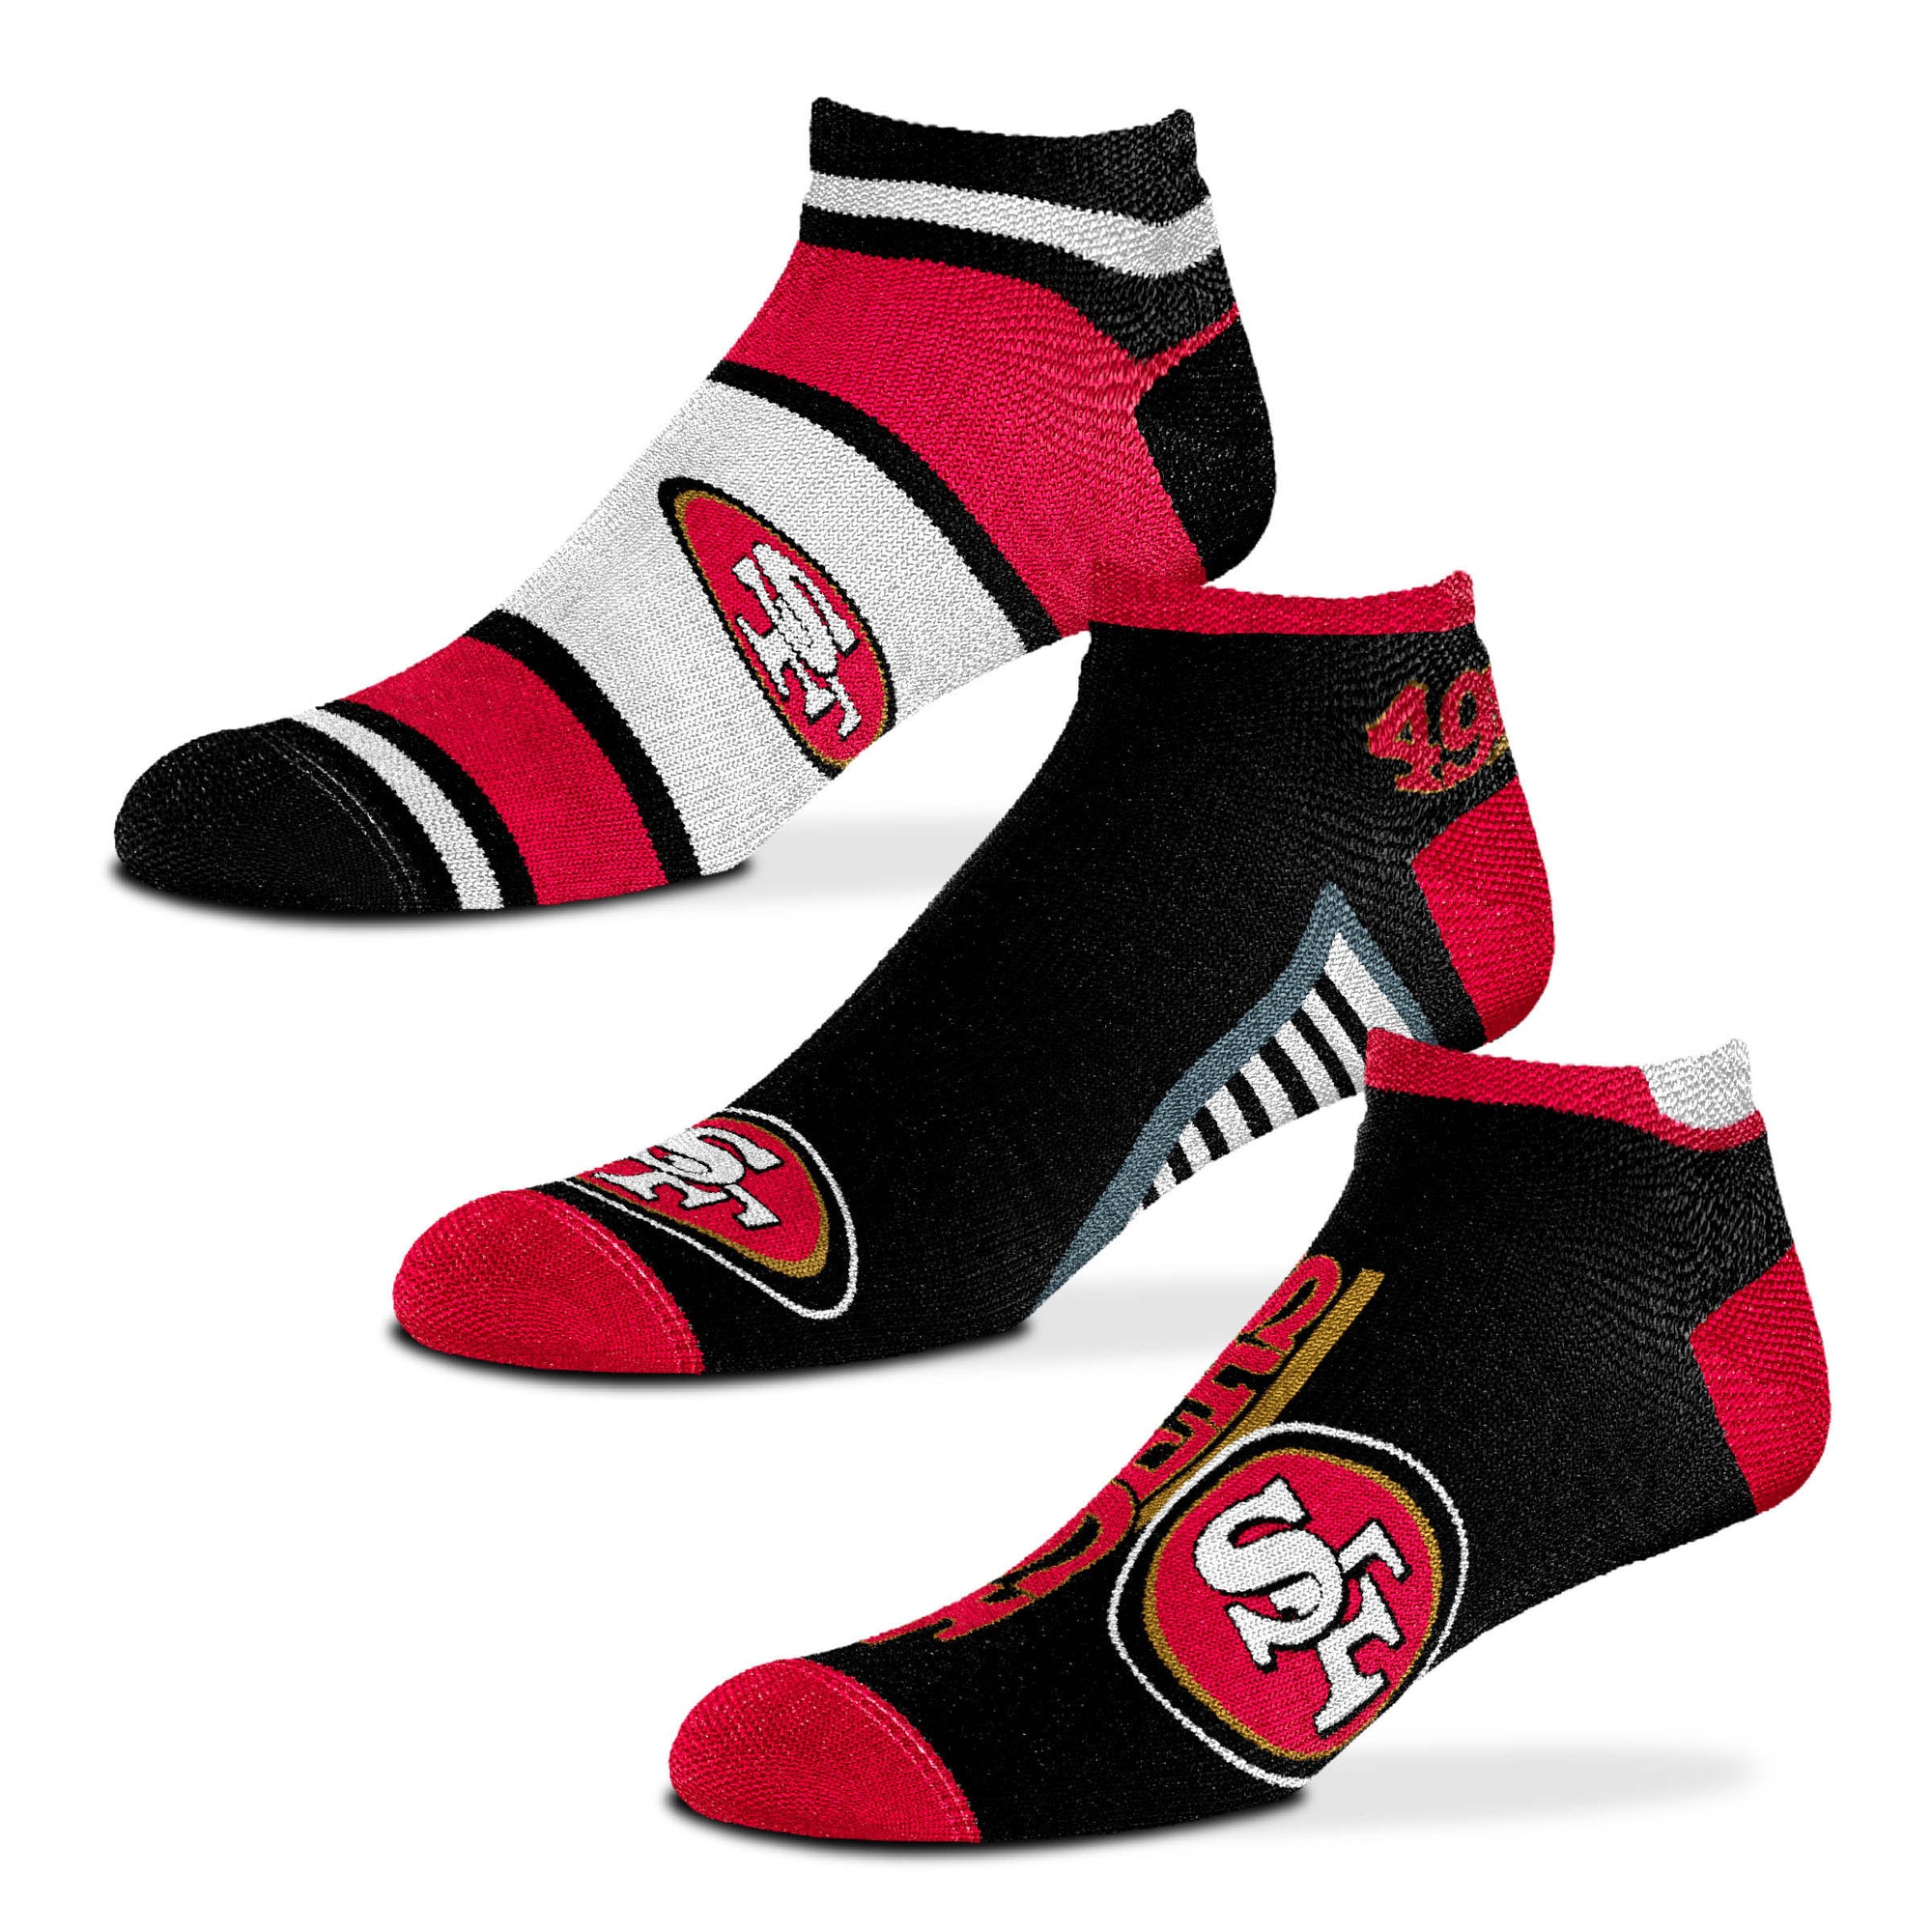 San Francisco 49ers Show Me The Money (3 Pack)